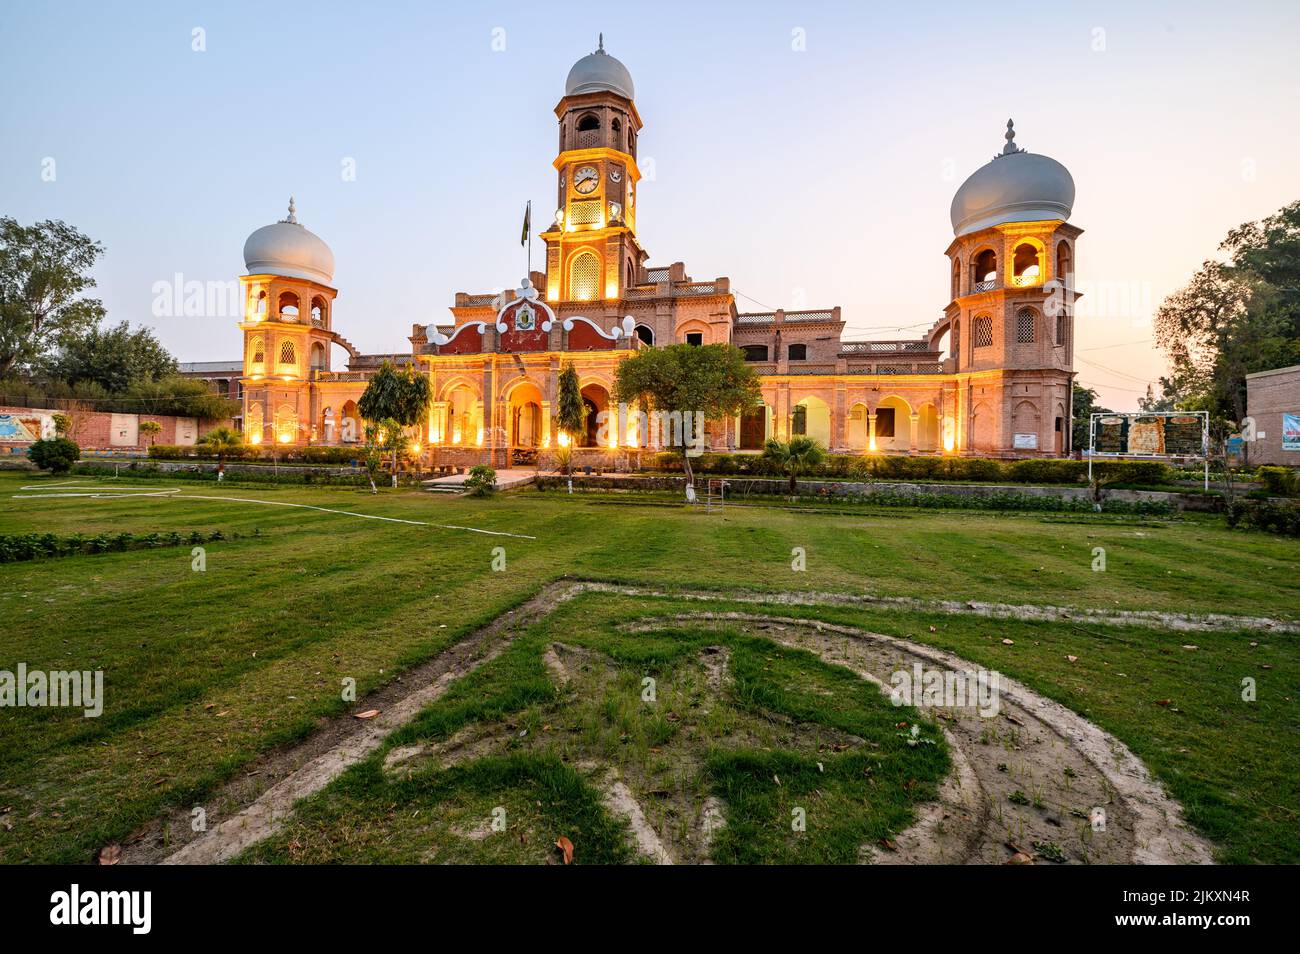 Sadiq Dane High School is the largest school in Bahawalpur with over 2000 students currently enrolled. Stock Photo